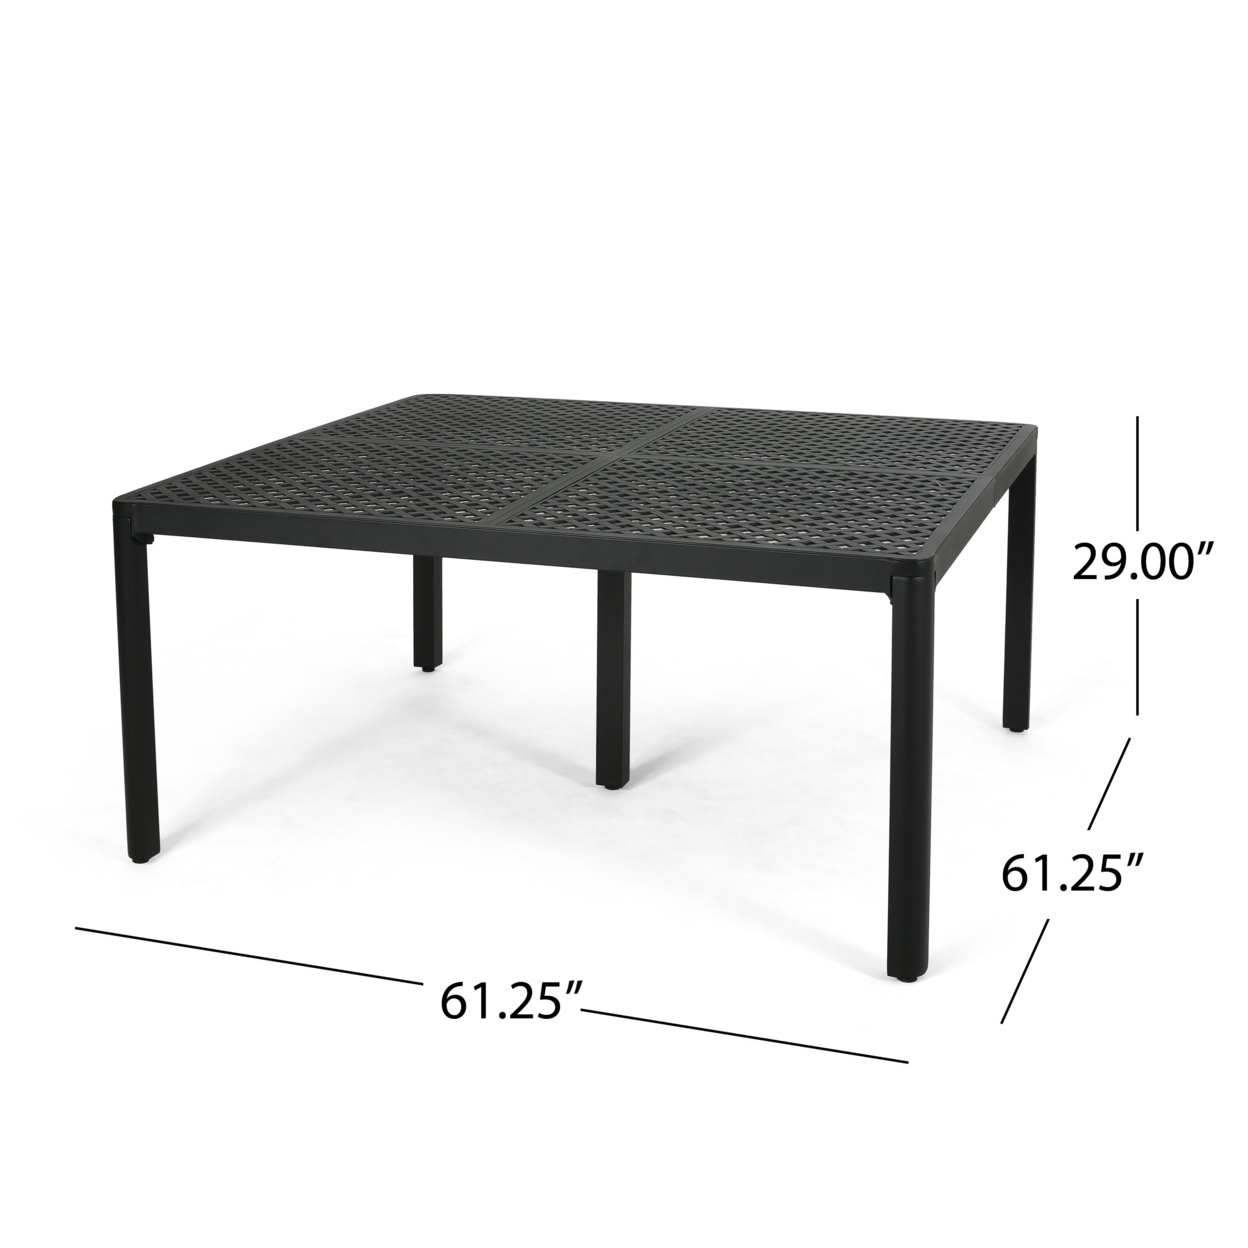 Athena Modern Aluminum Dining Table With Woven Accents - Antique Matte Black